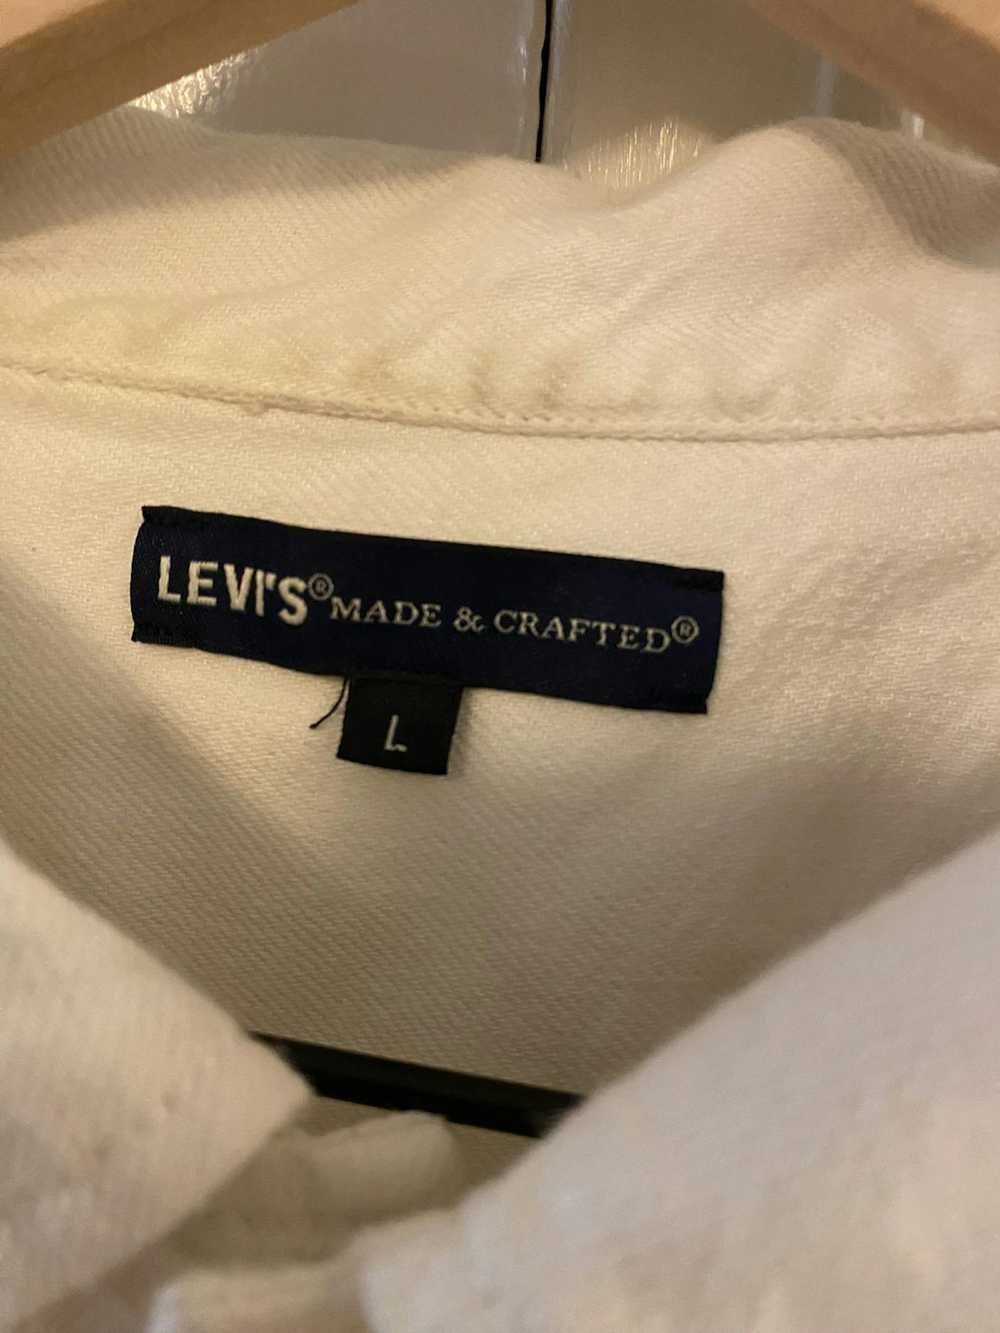 Levi's Made & Crafted Levi’s made and crafted but… - image 3